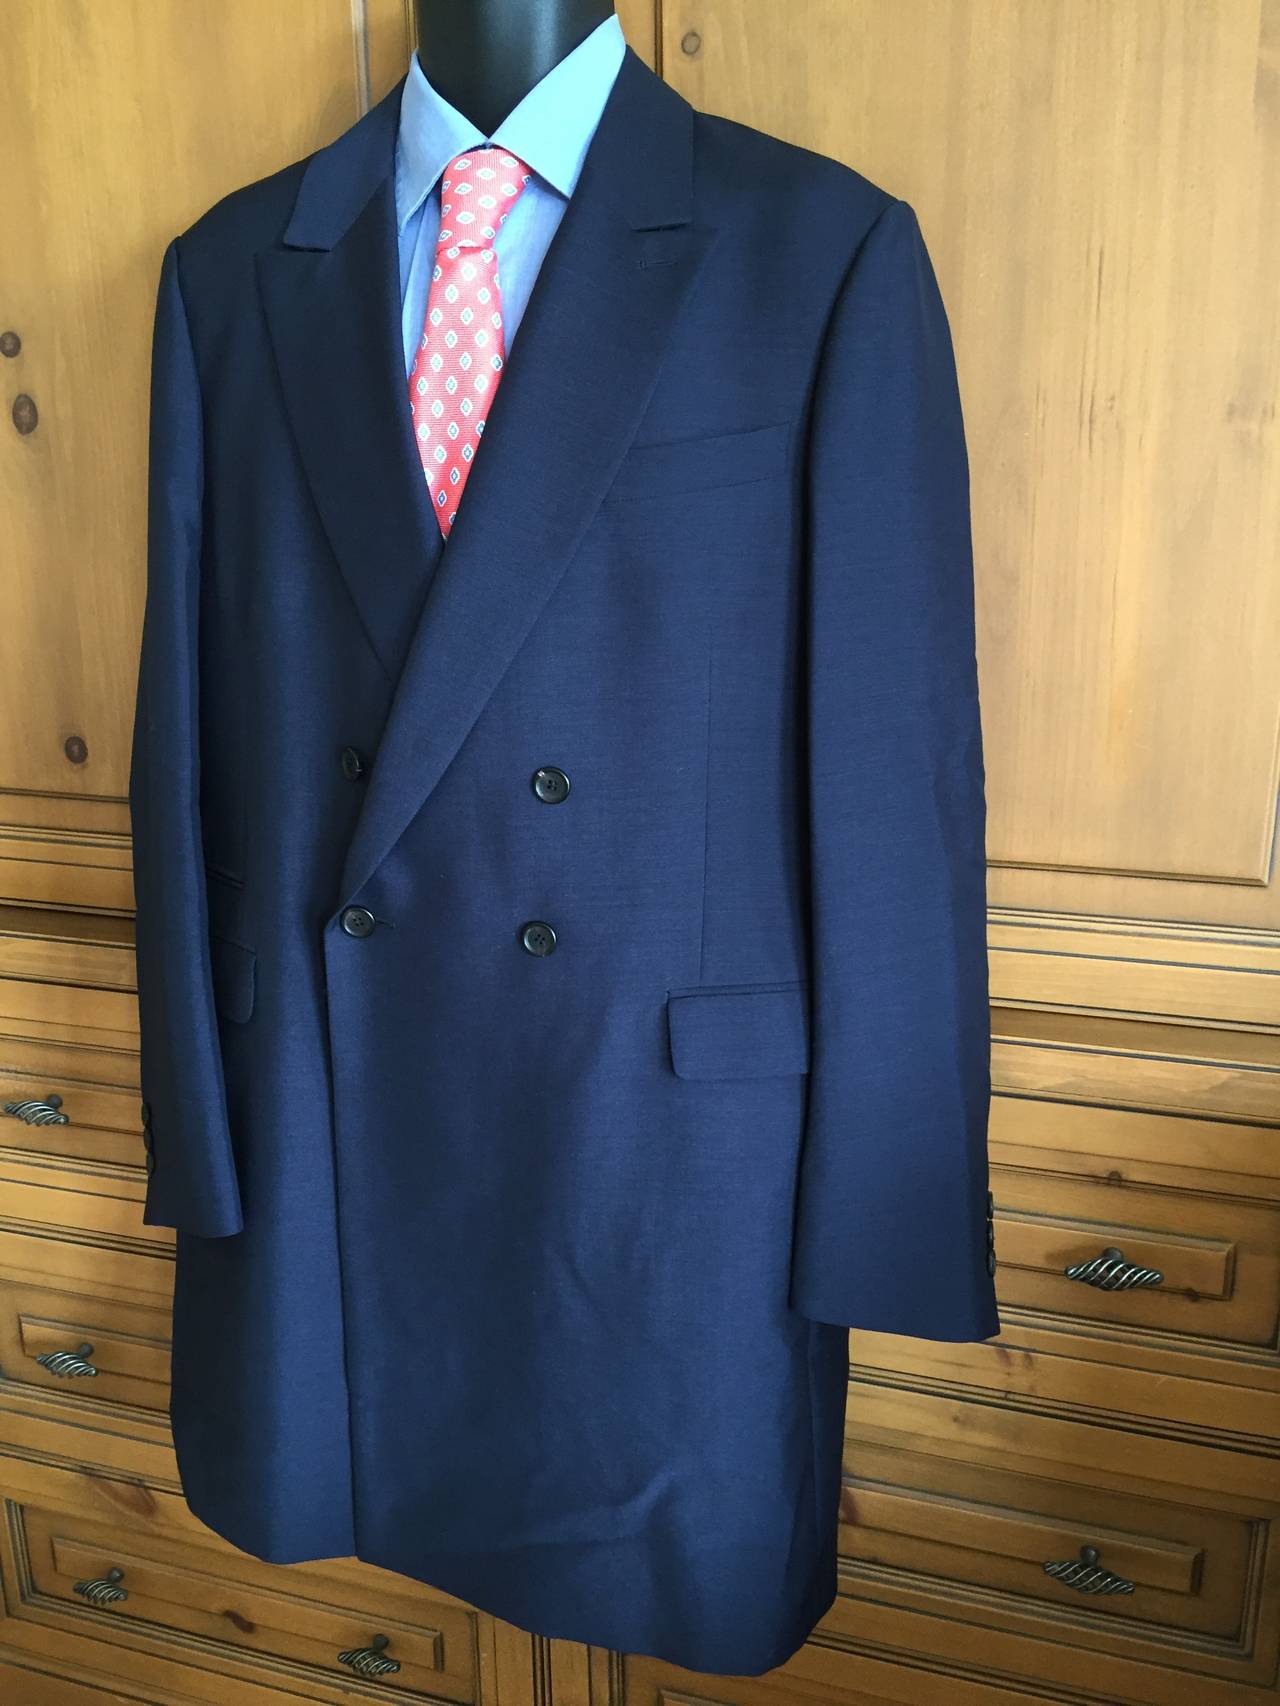 Prada Elegant Mens Mohair Coat.
US size 48.
Very lightweight mohair 60%, wool blend 40%.
Unlined, this is the perfect three season dress coat.
Measurements ;
Chest 49